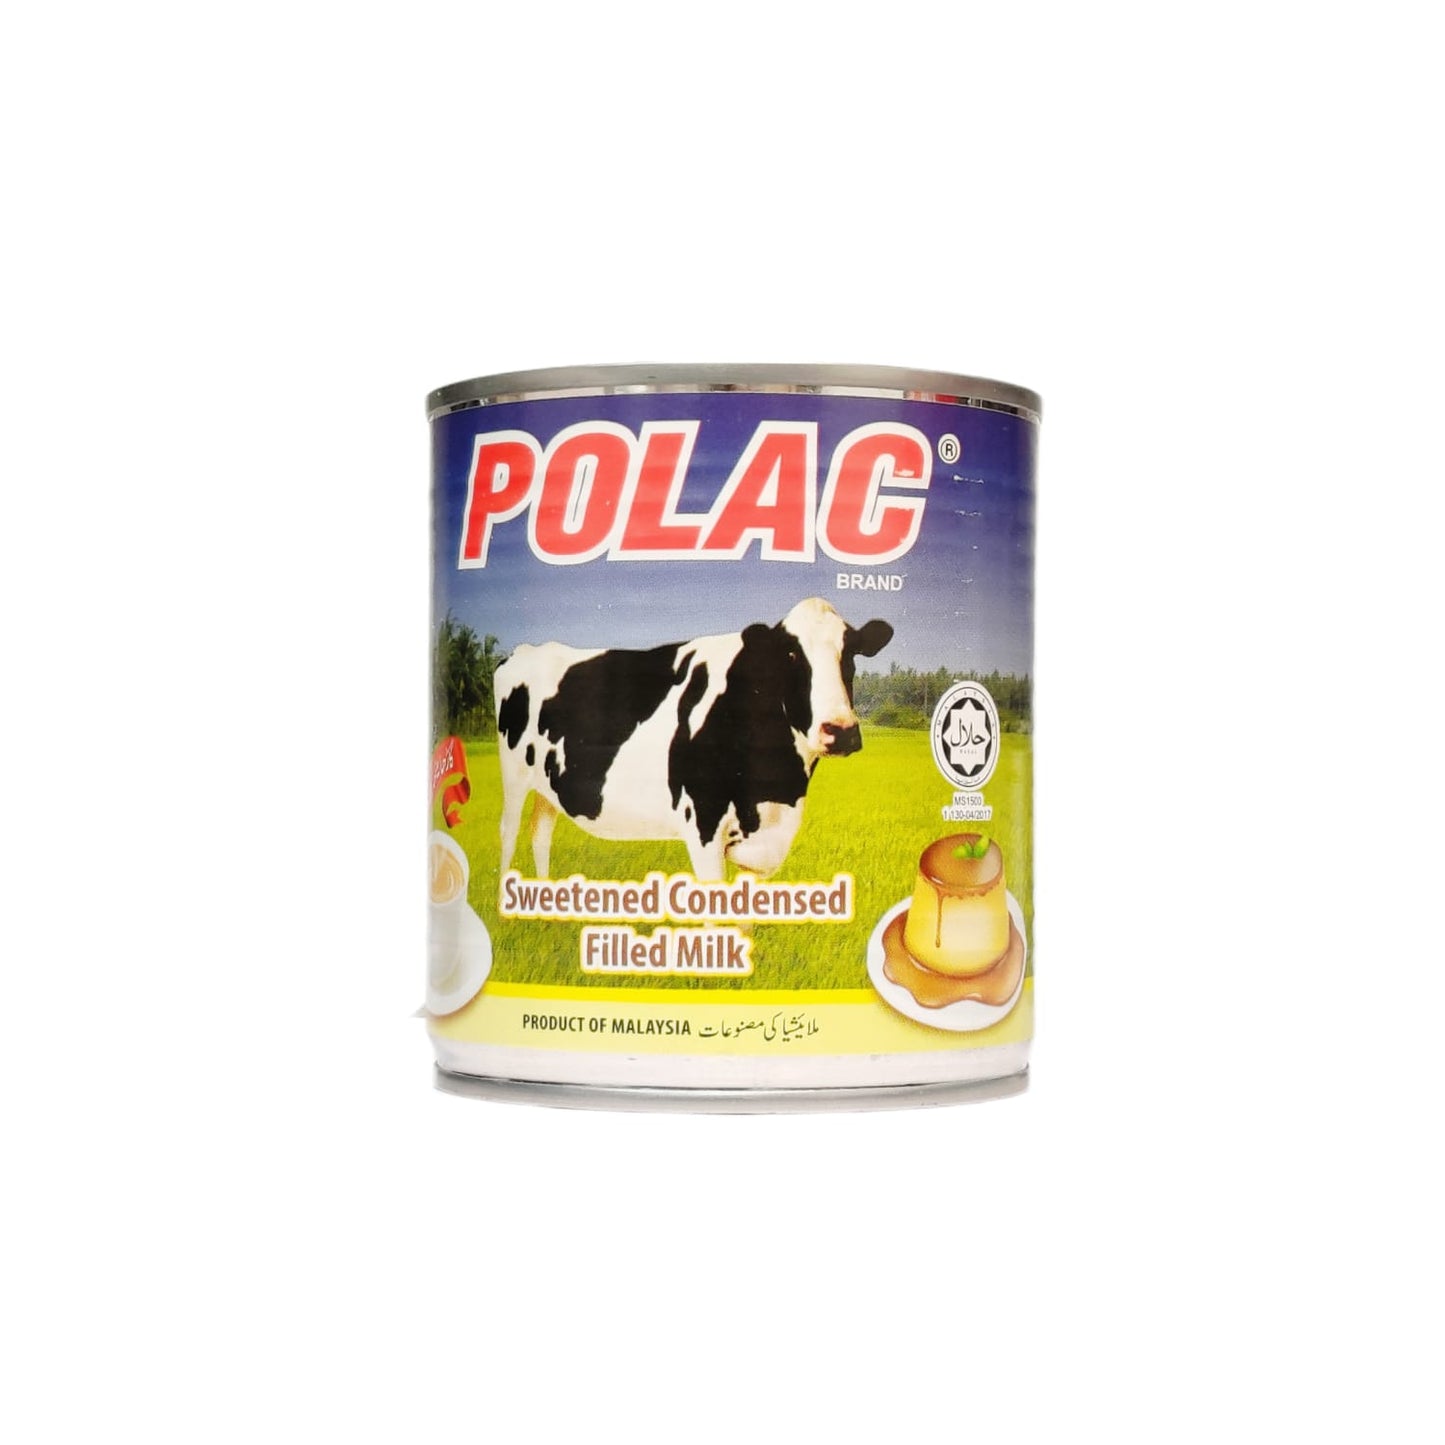 Polac Sweetened Condensed Filled Milk 390 gm